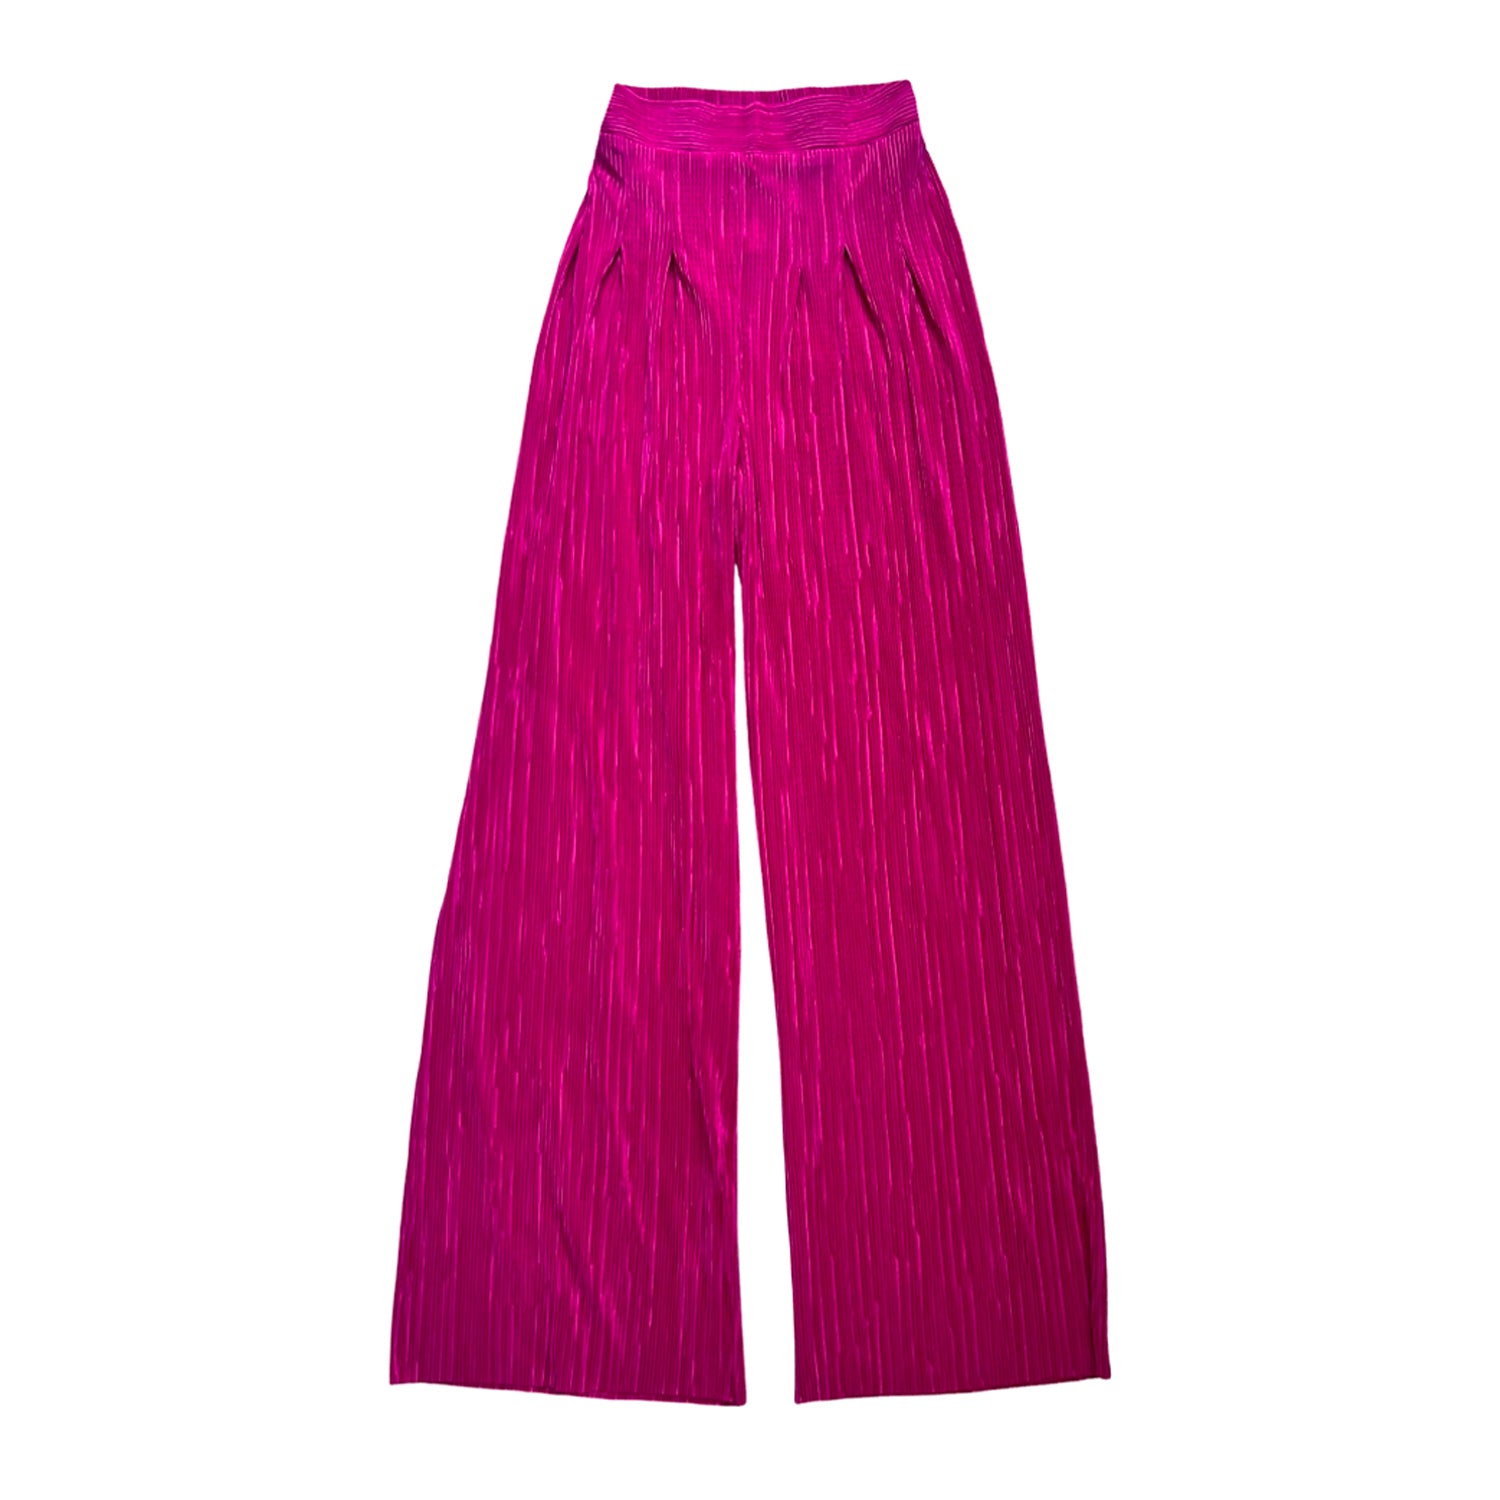 Wide Leg Pleated Pants in Hot Pink